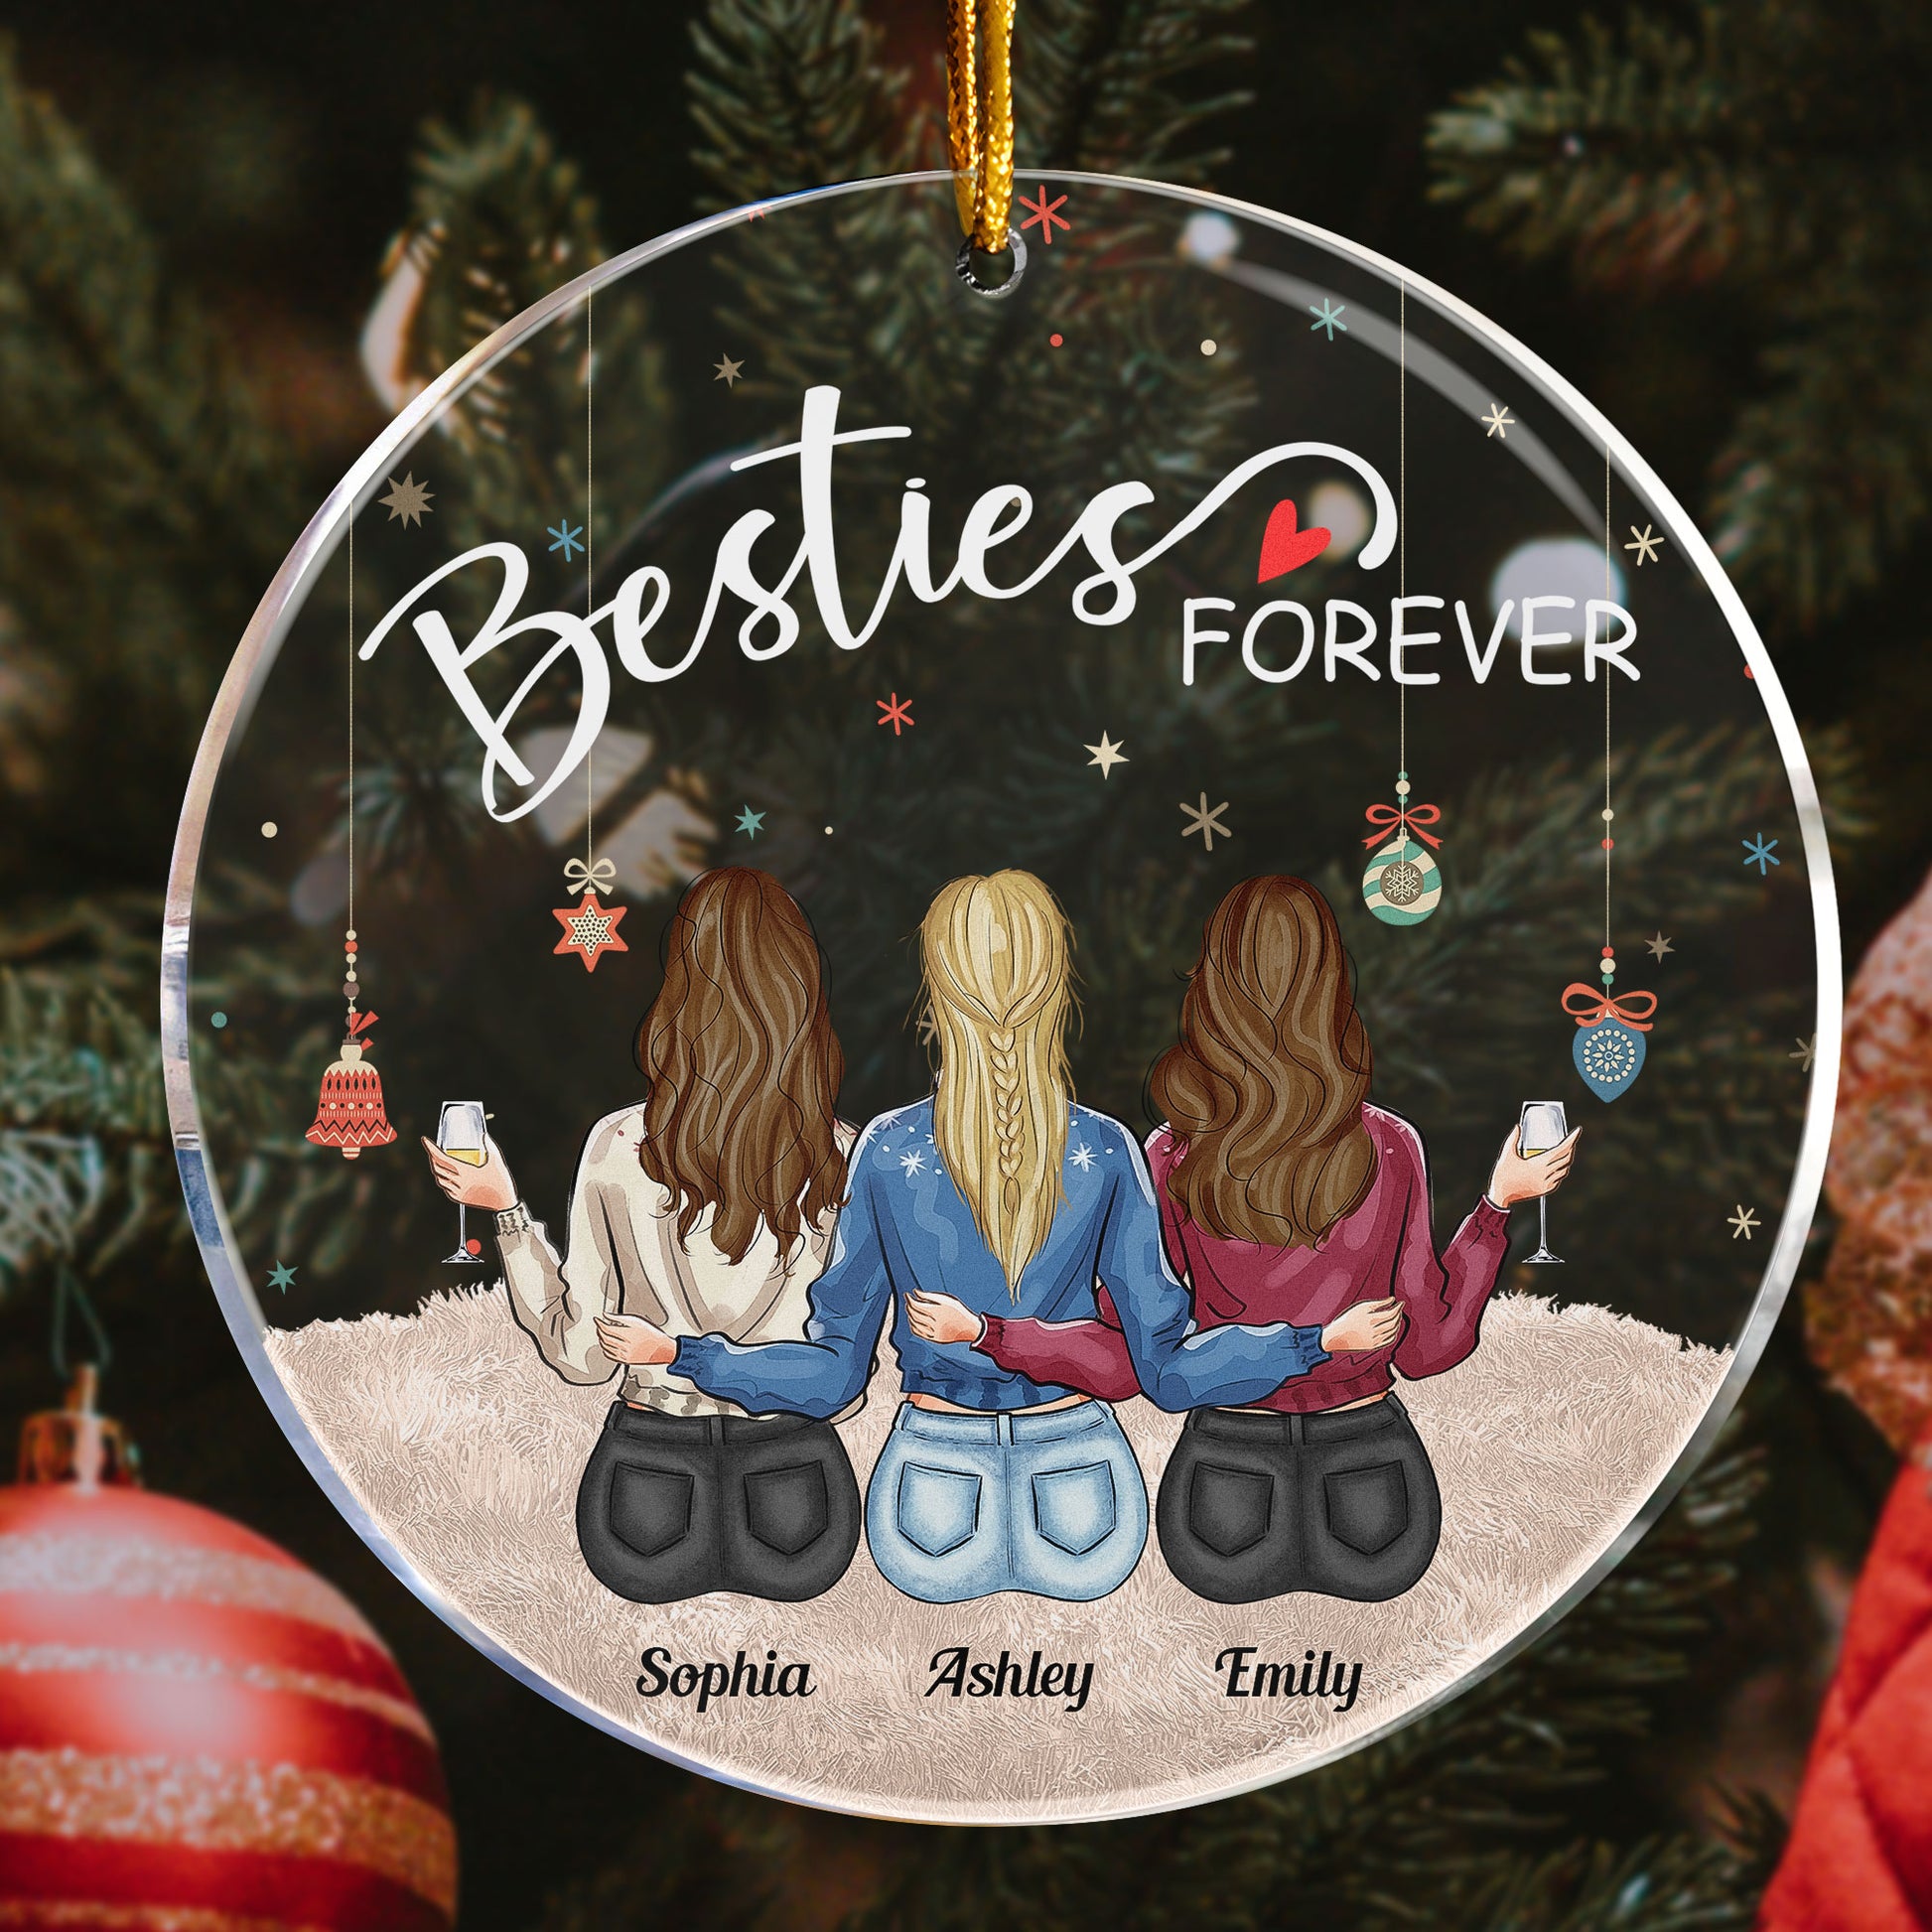 Christmas Together - Personalized Circle Acrylic Ornament – Macorner